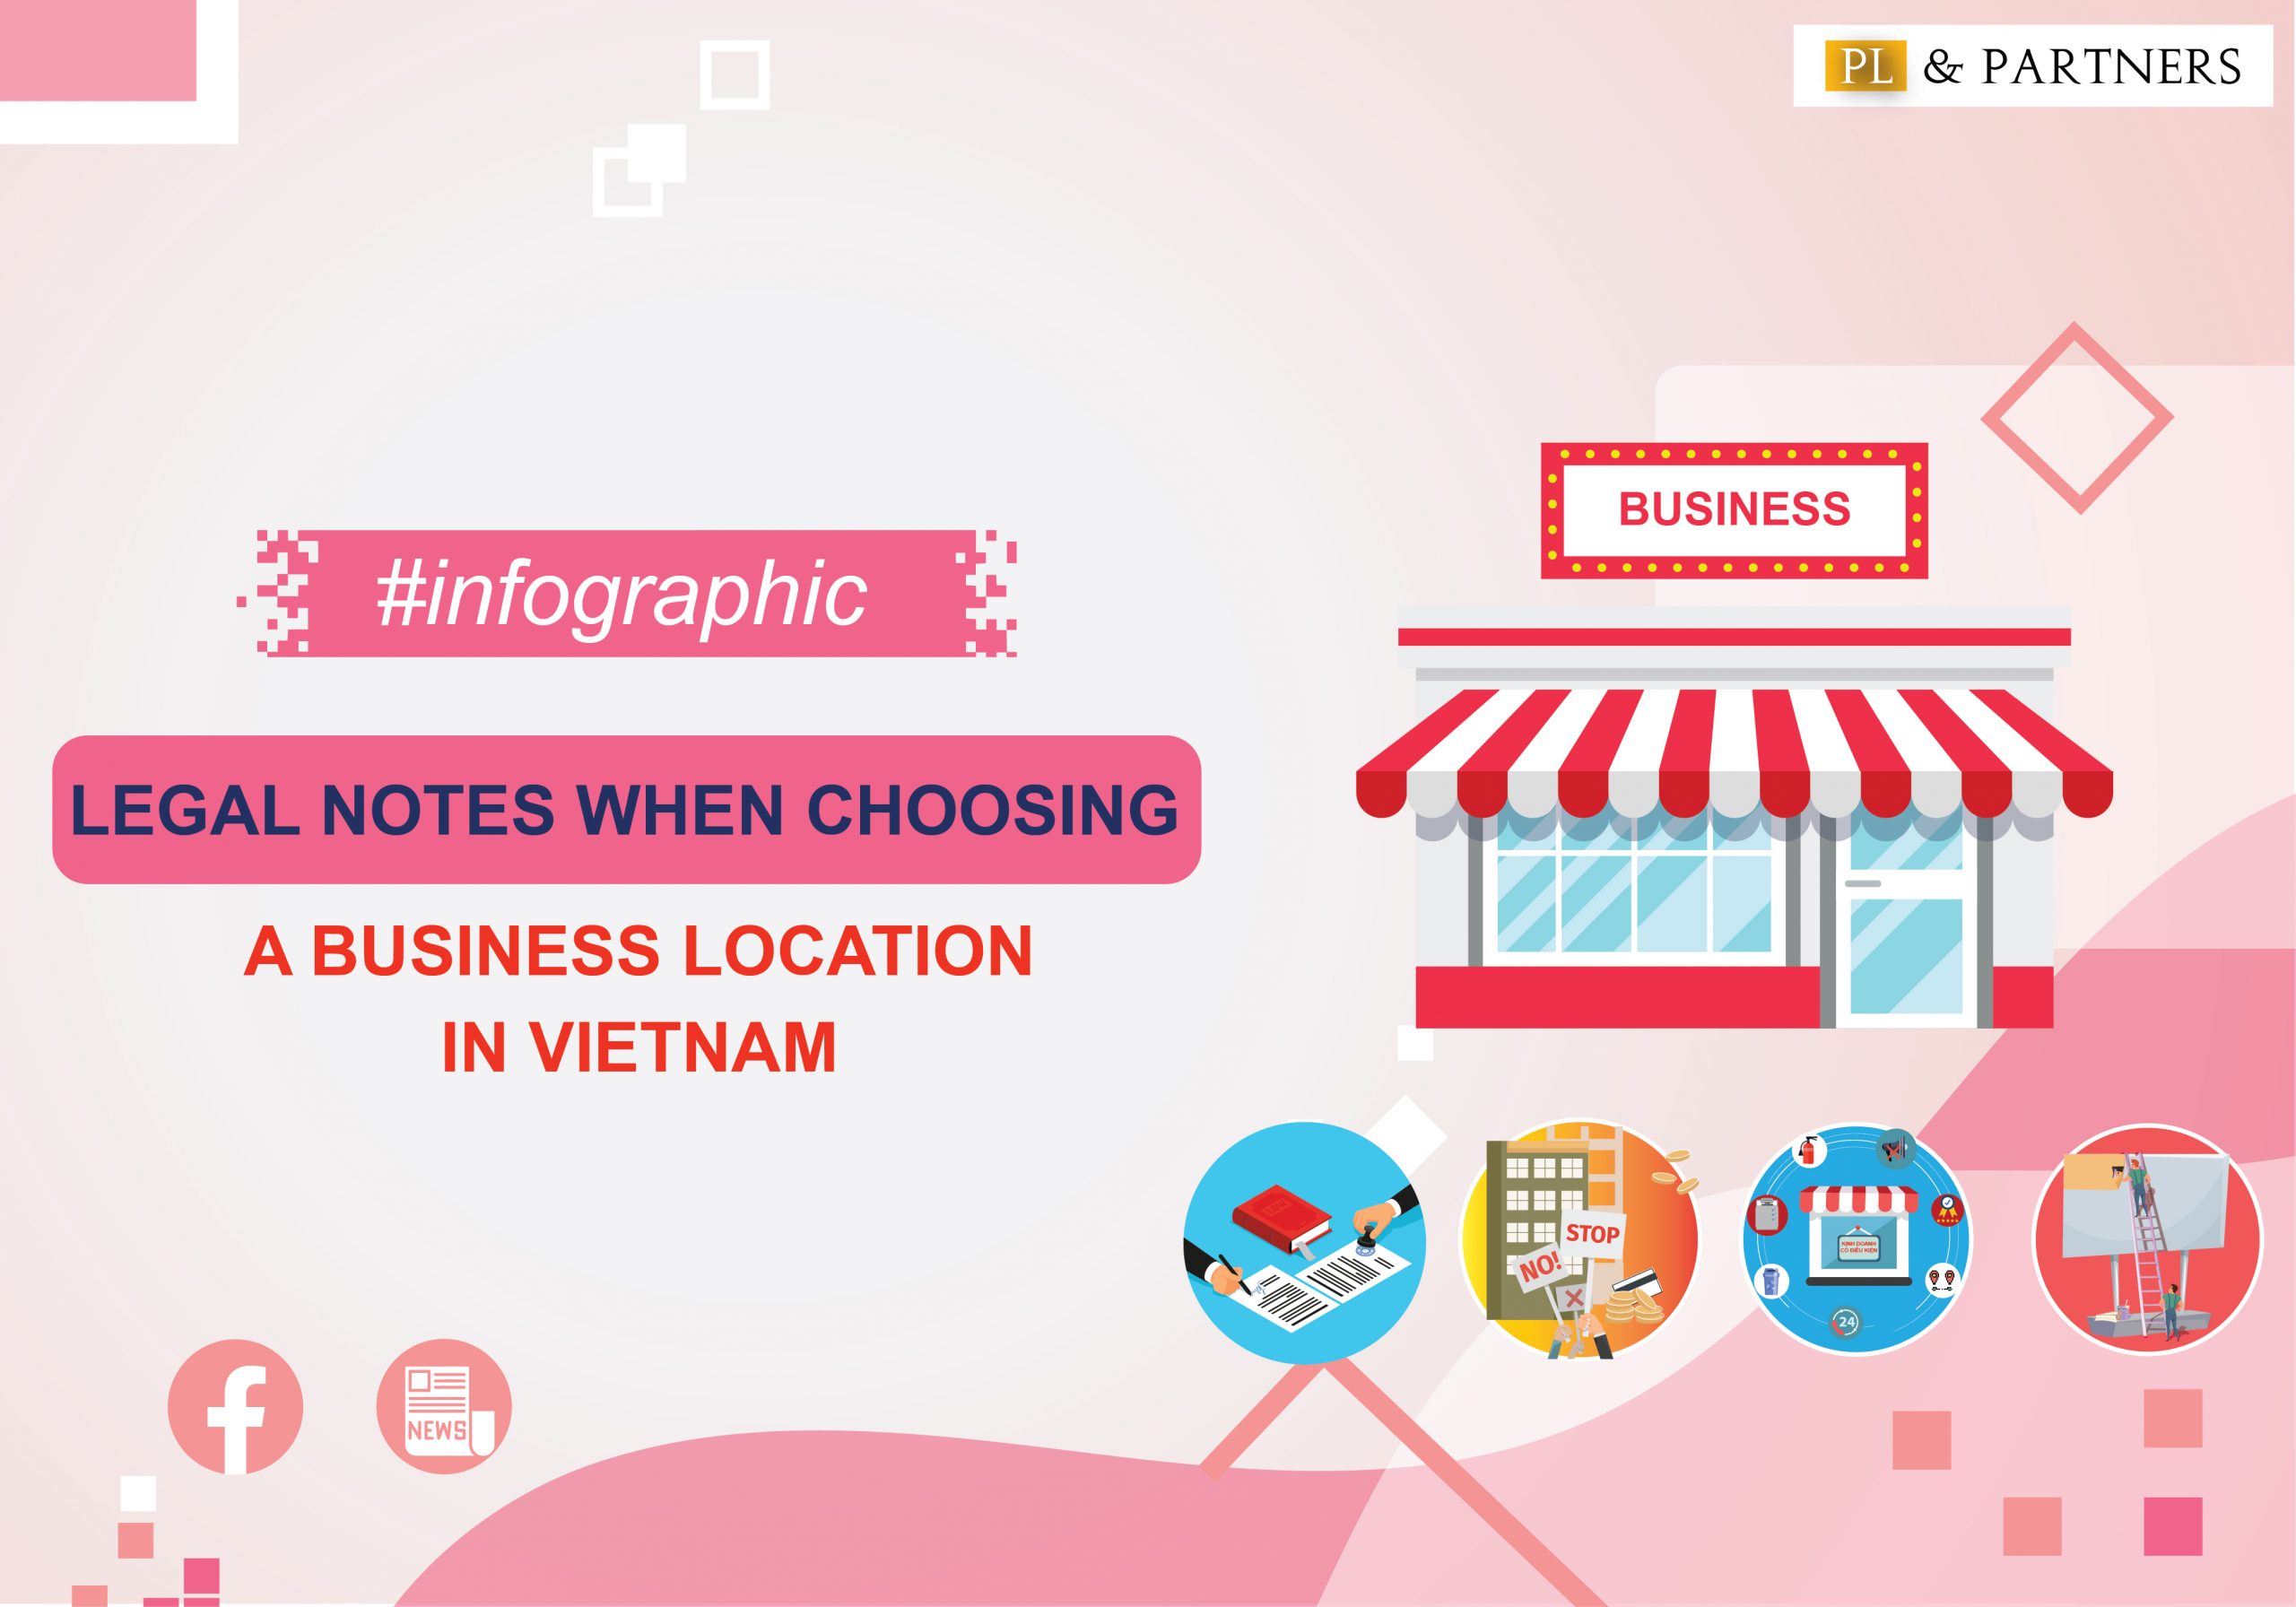 Legal notes when choosing a business location in Vietnam